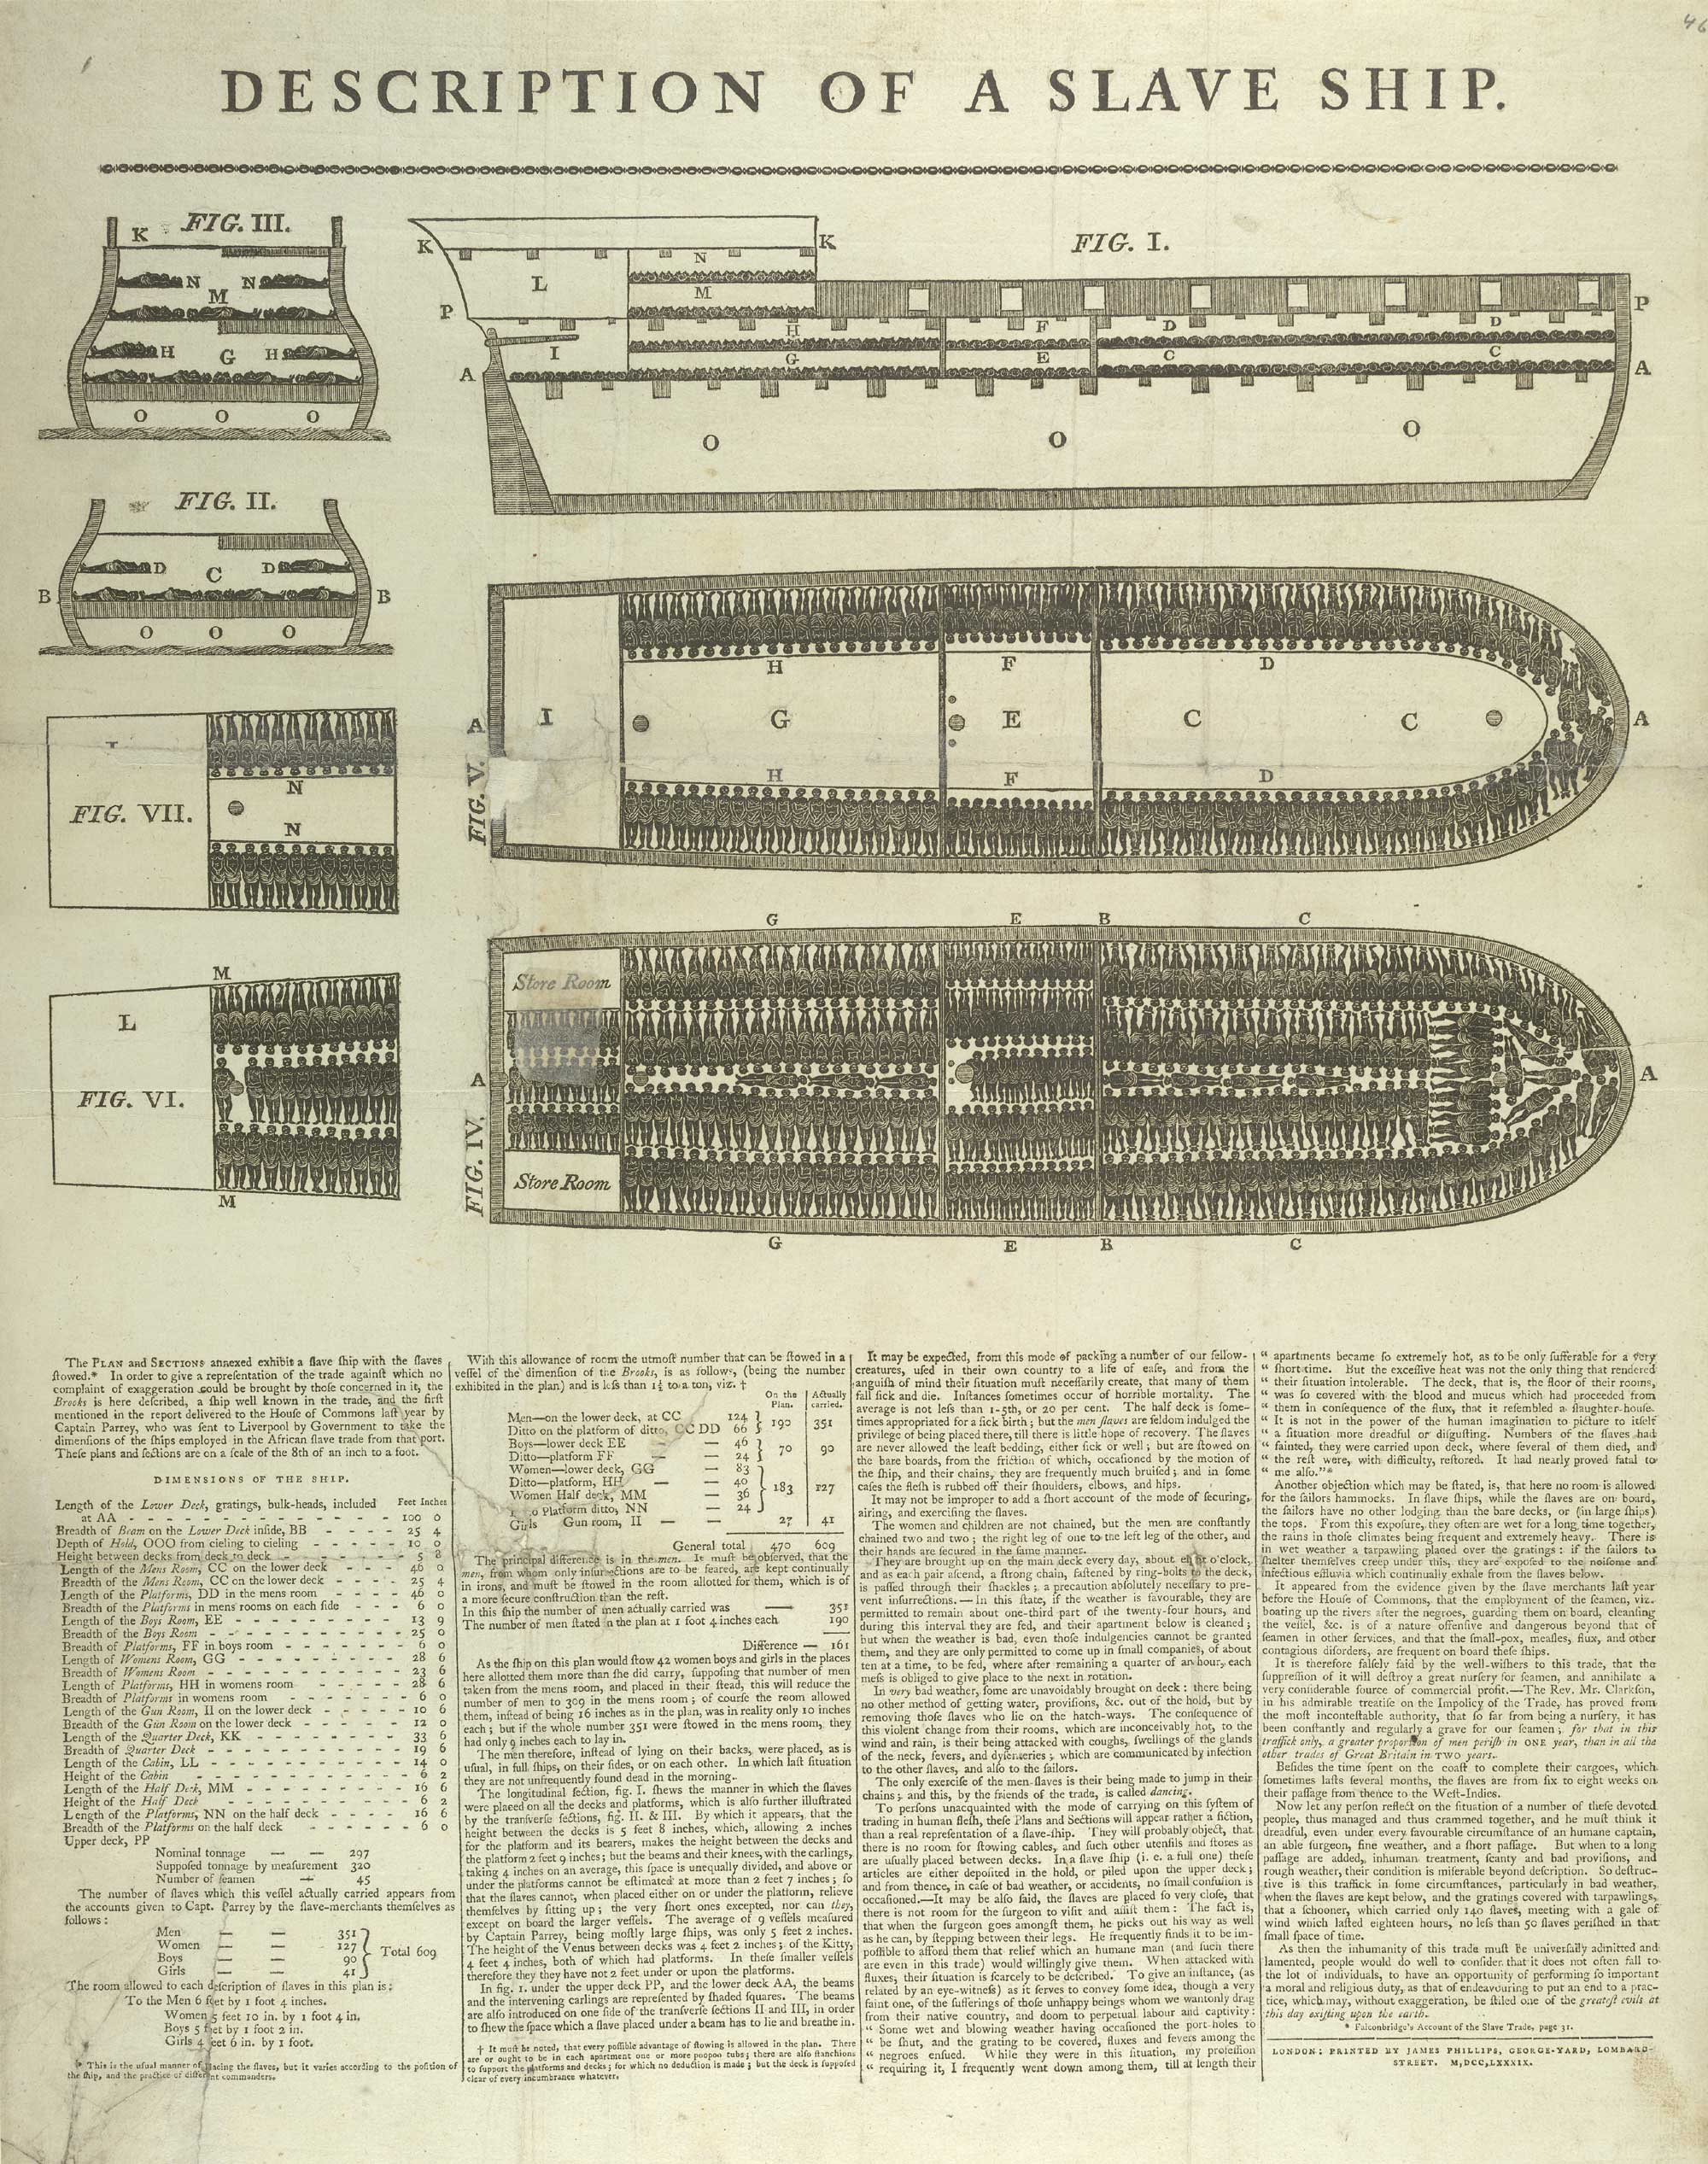 Part graphic and part text, this spread depicts and expounds upon the various sections of a slave ship. The top half of the page shows the images, while the bottom half contains small typescript explanations of the diagrams in the top half. On the right-hand side of the page, three different views of the length of the ship are printed in vertical succession: the first, labeled Fig. I, is a side-facing view of the outside of the ship, while the two underneath, labeled FIg. V and Fig. IV, respectively, are aerial views of a ship’s hold on the two levels below the deck. Each wall of the ship and its different rooms and levels is assigned a capital letter of the alphabet, so as to indicate consistency between the various perspective views of the ship. On the left-hand side of the page, four smaller images of stacked compartments and rooms in the ship are shown in more detail, labeled Fig III., Fig. II, Fig. VII, and Fig. VI, respectively. The top two figures on the left–figures III and II–show side views of the back of the ship (levels K, N, M, H, G, and O), while the bottom two figures–VII and VI–show aerial views beneath the deck. Keeping with the abstraction of the abovementioned Plan, the captured people on board are drawn with no remarkable individual features, merely shaded in black in a shape resembling the human body from the aerial views of the ship (shown in figures IV, V, VI, and VII). Moreover, the side views of the vessel–figures I, II, and III–abstract further from the human form by representing people by simple semicircles, which often overlap and lump together, to give the impression of heads in the hold of the ship.